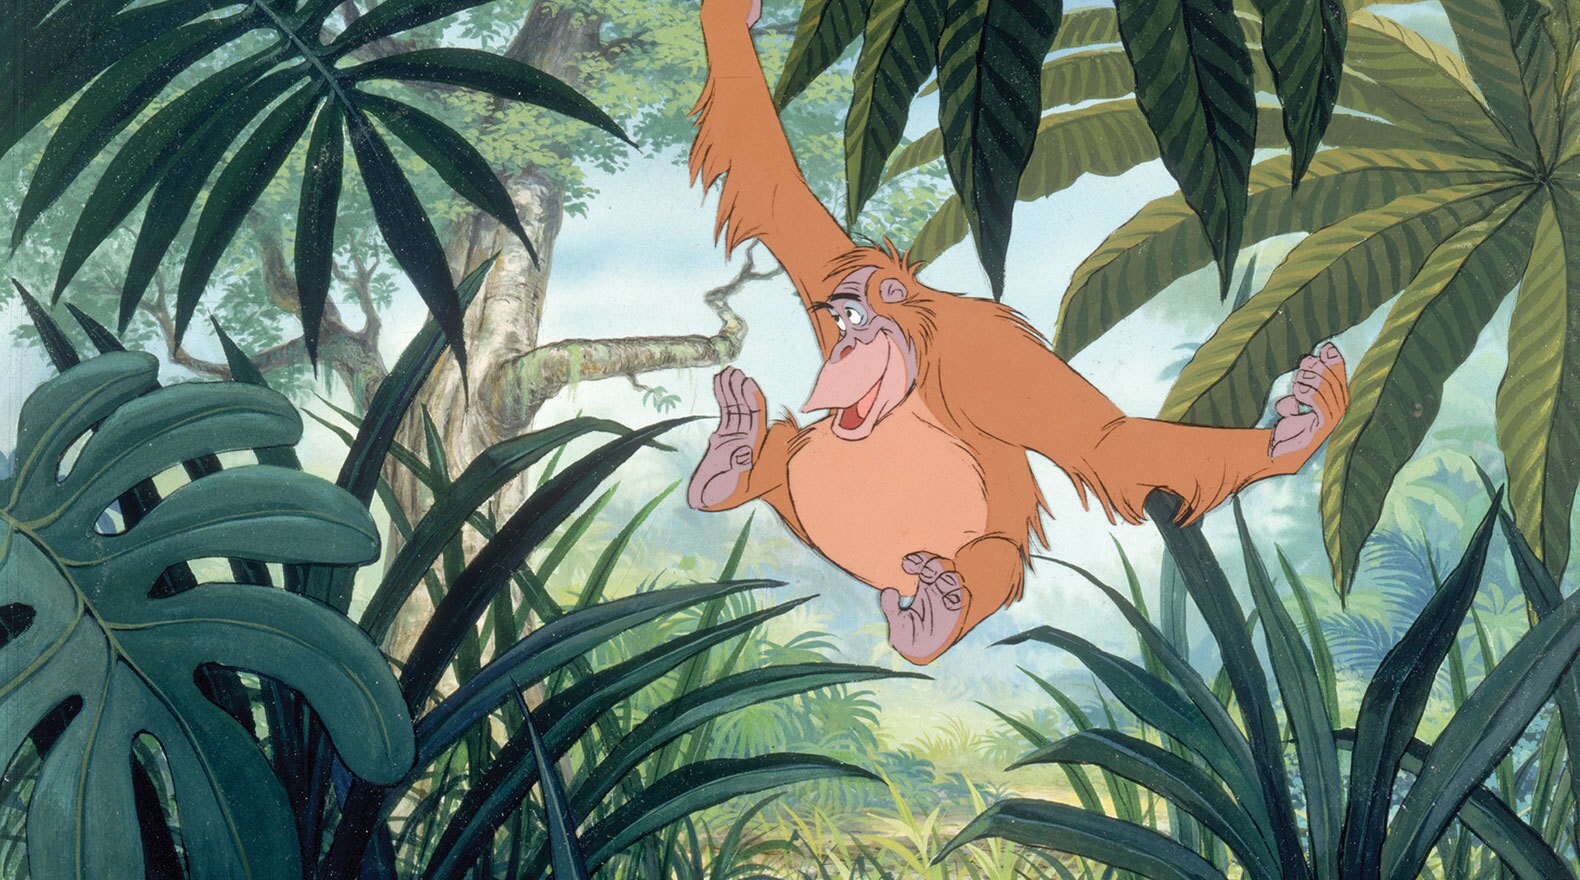 "Now, I'm the king of the swingers!" King Louie (voice of Louis Prima) from the Disney movie The Jungle Book (1967).